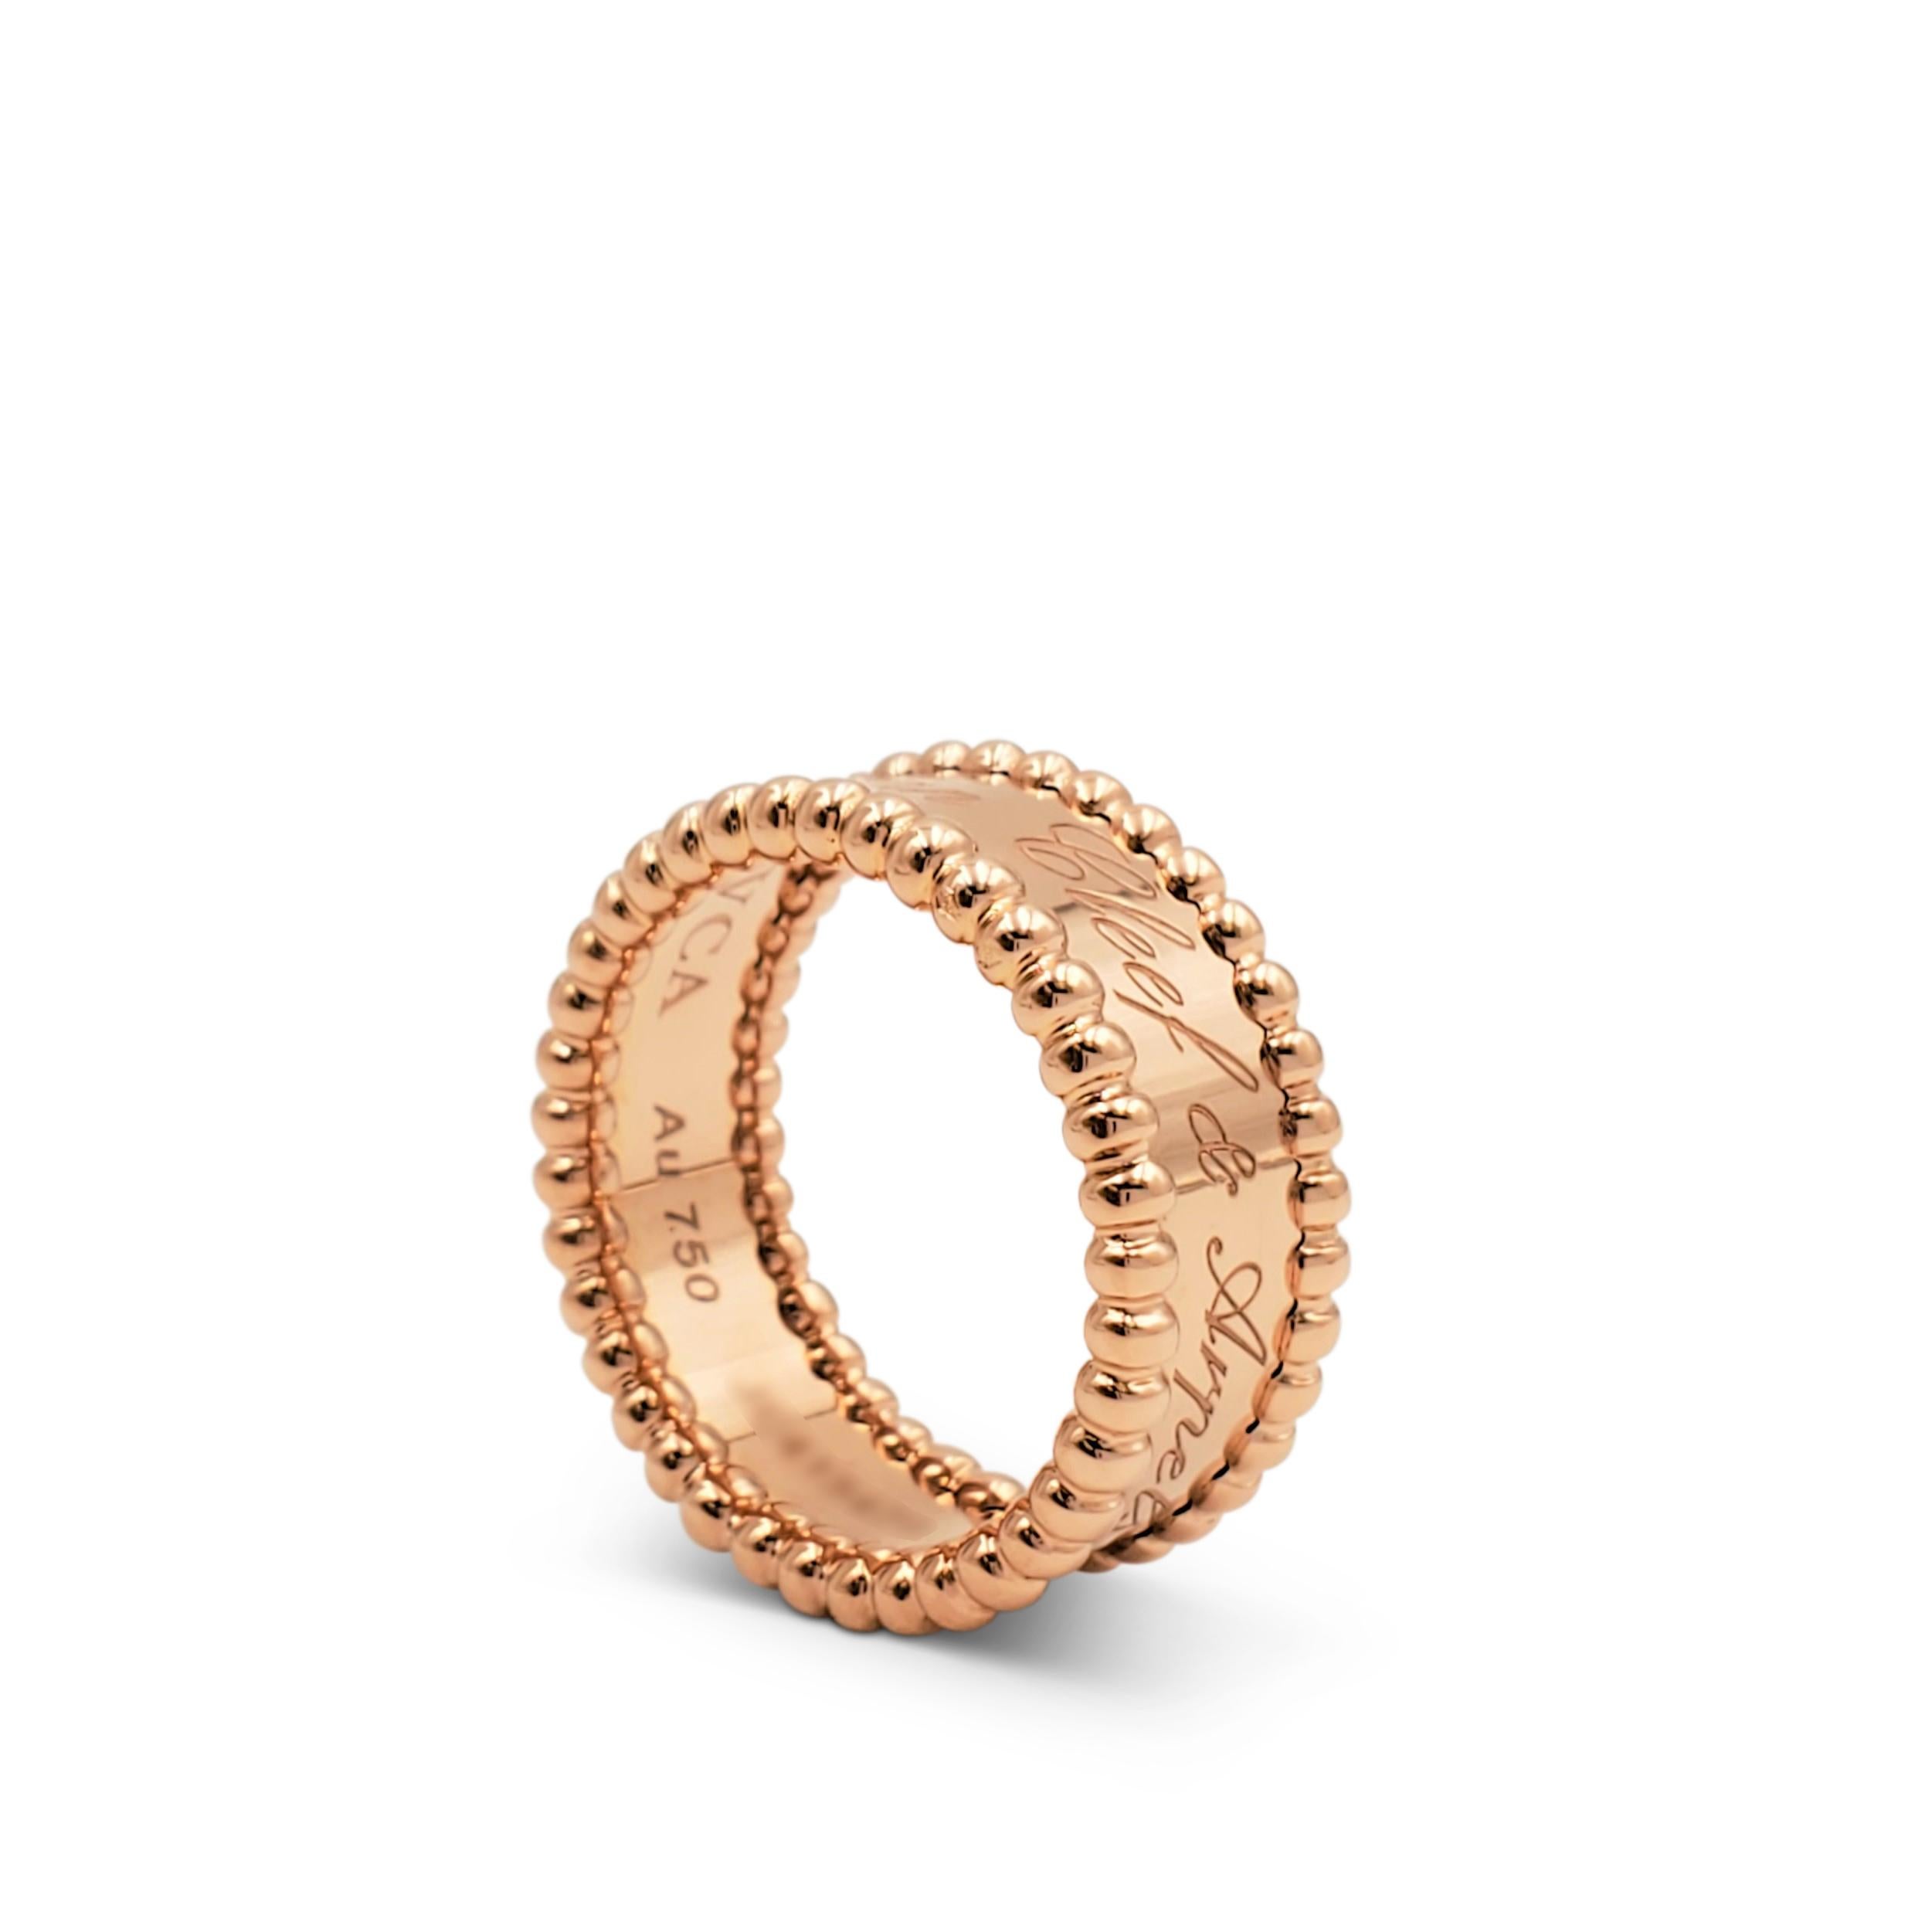 Authentic Van Cleef & Arpels 'Perlée Signature' ring crafted in 18 karat rose gold features the house's logo engraved on the surface in elegant calligraphy. Signed VCA, Au750, 50, with serial number. Size 50 (US size 5 1/4). The ring is not